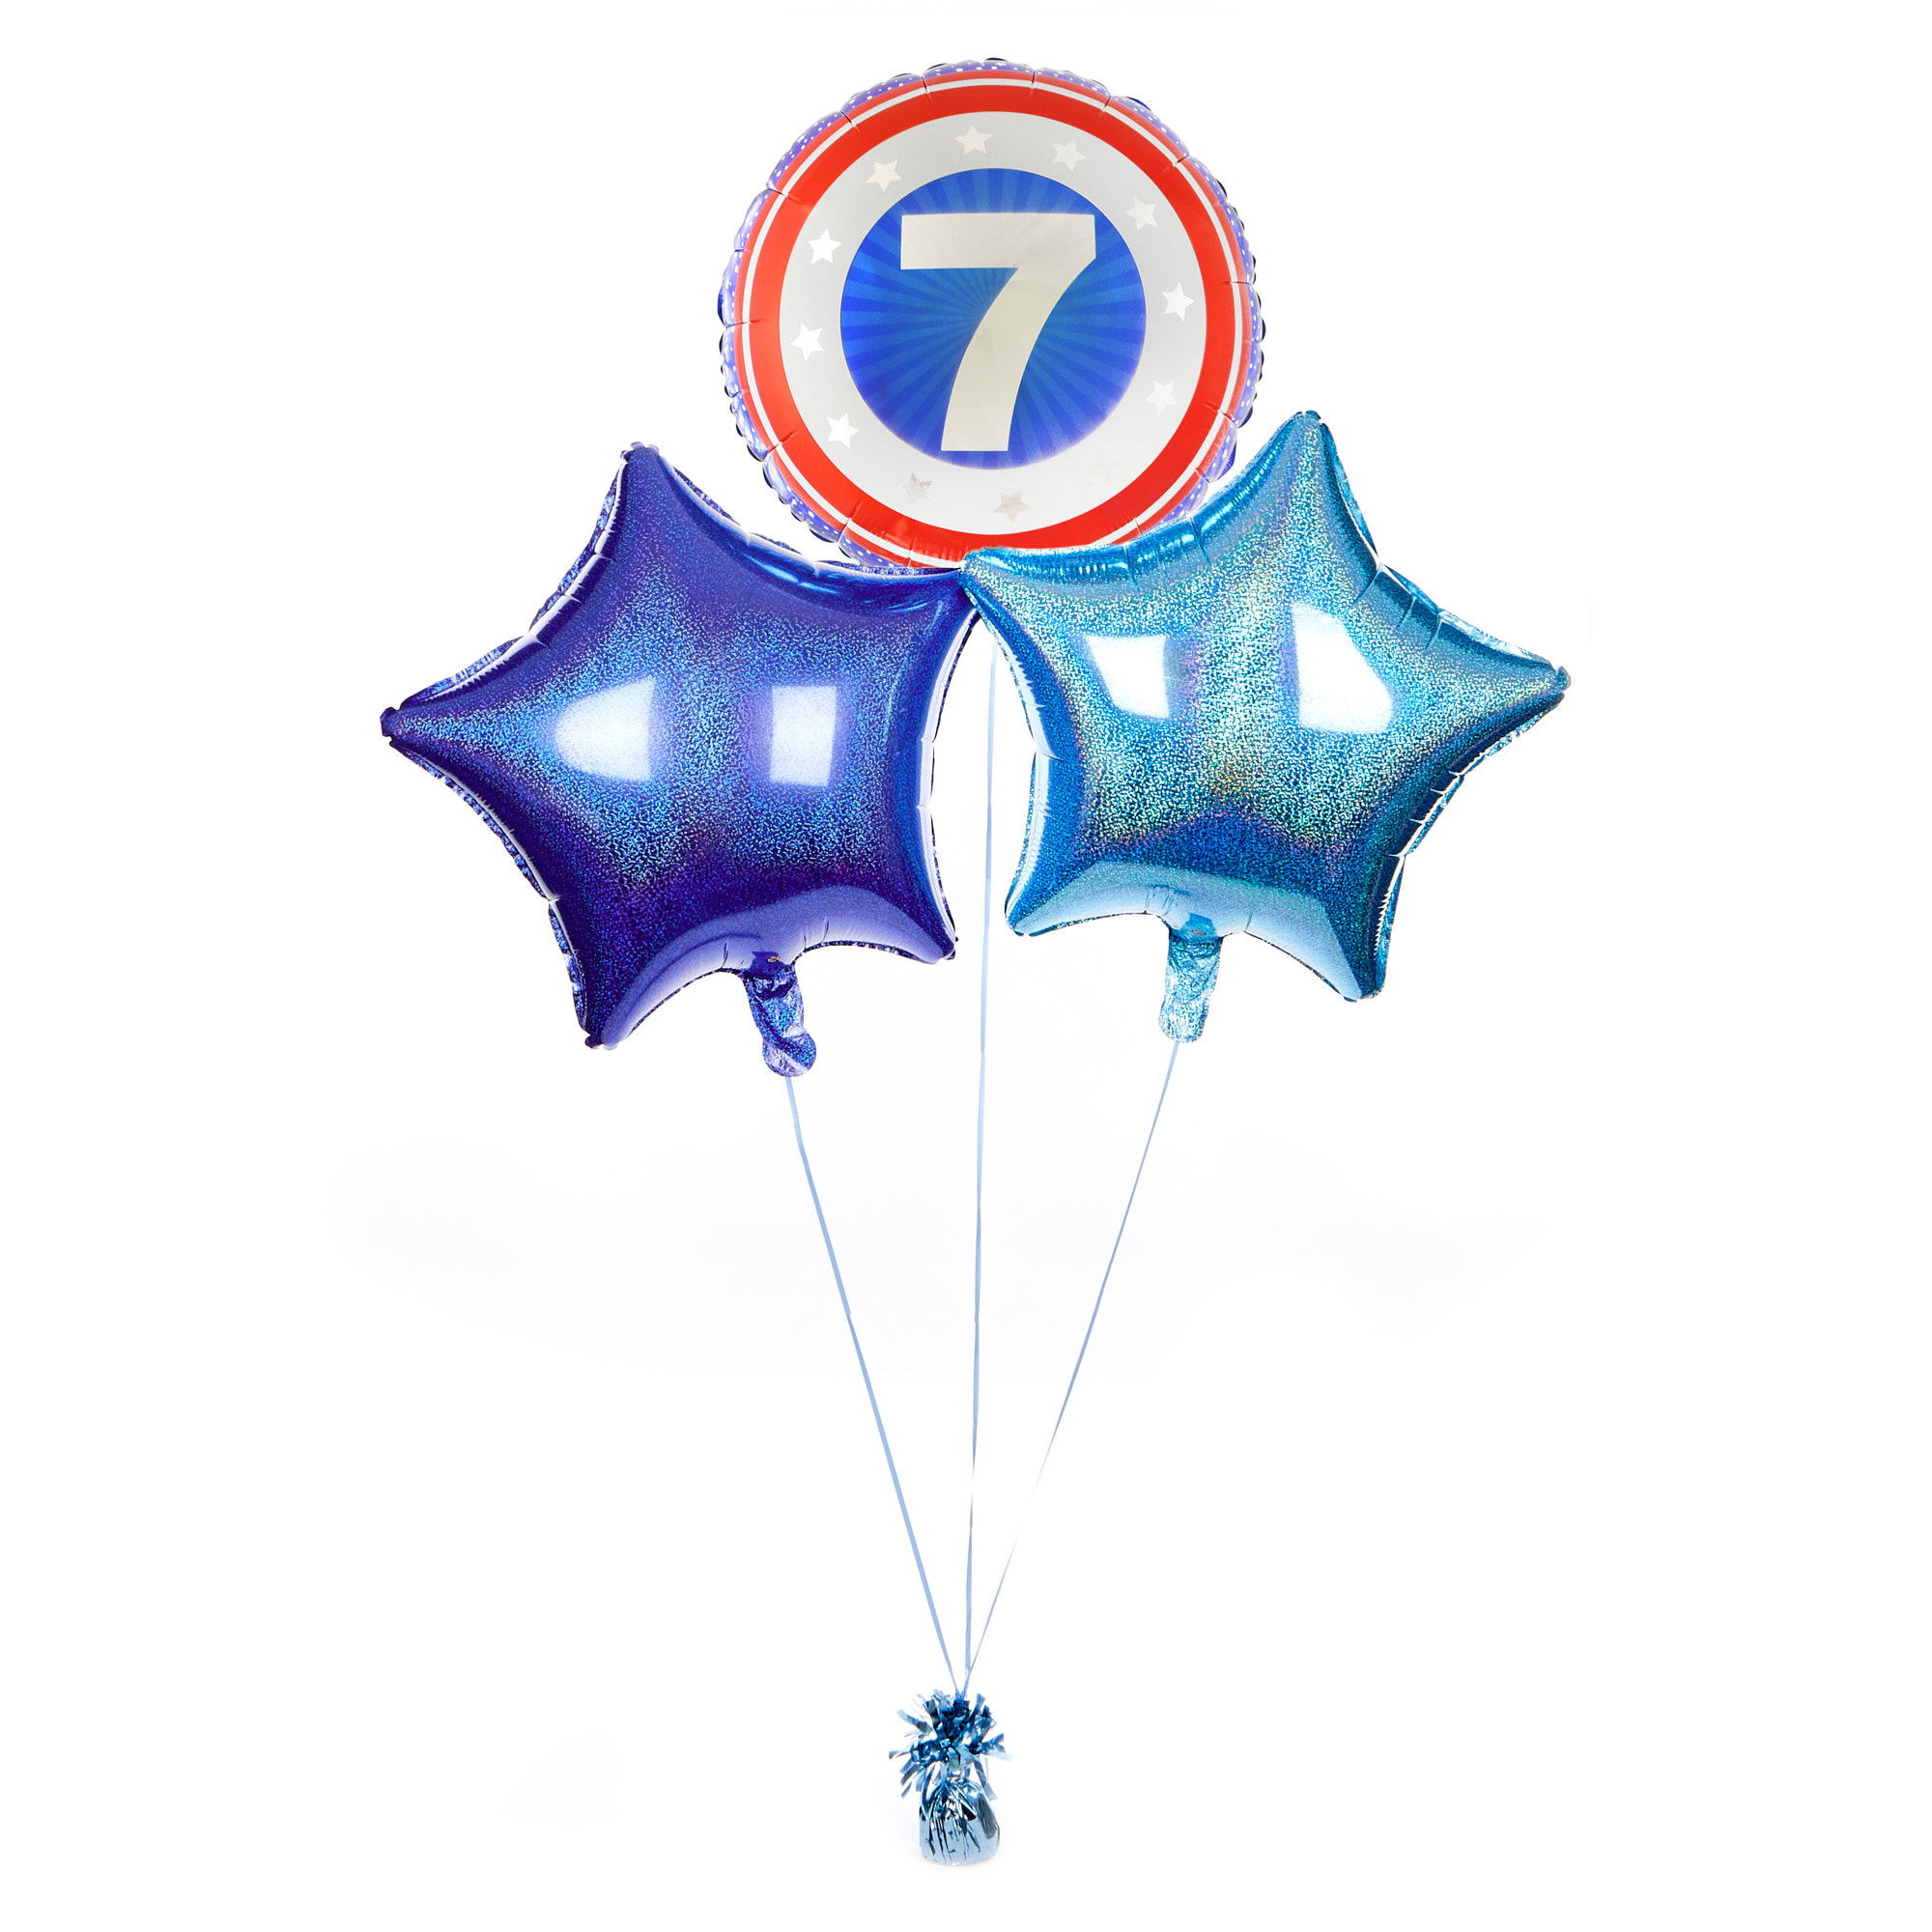 Superhero Shield 7th Birthday Balloon Bouquet - DELIVERED INFLATED!